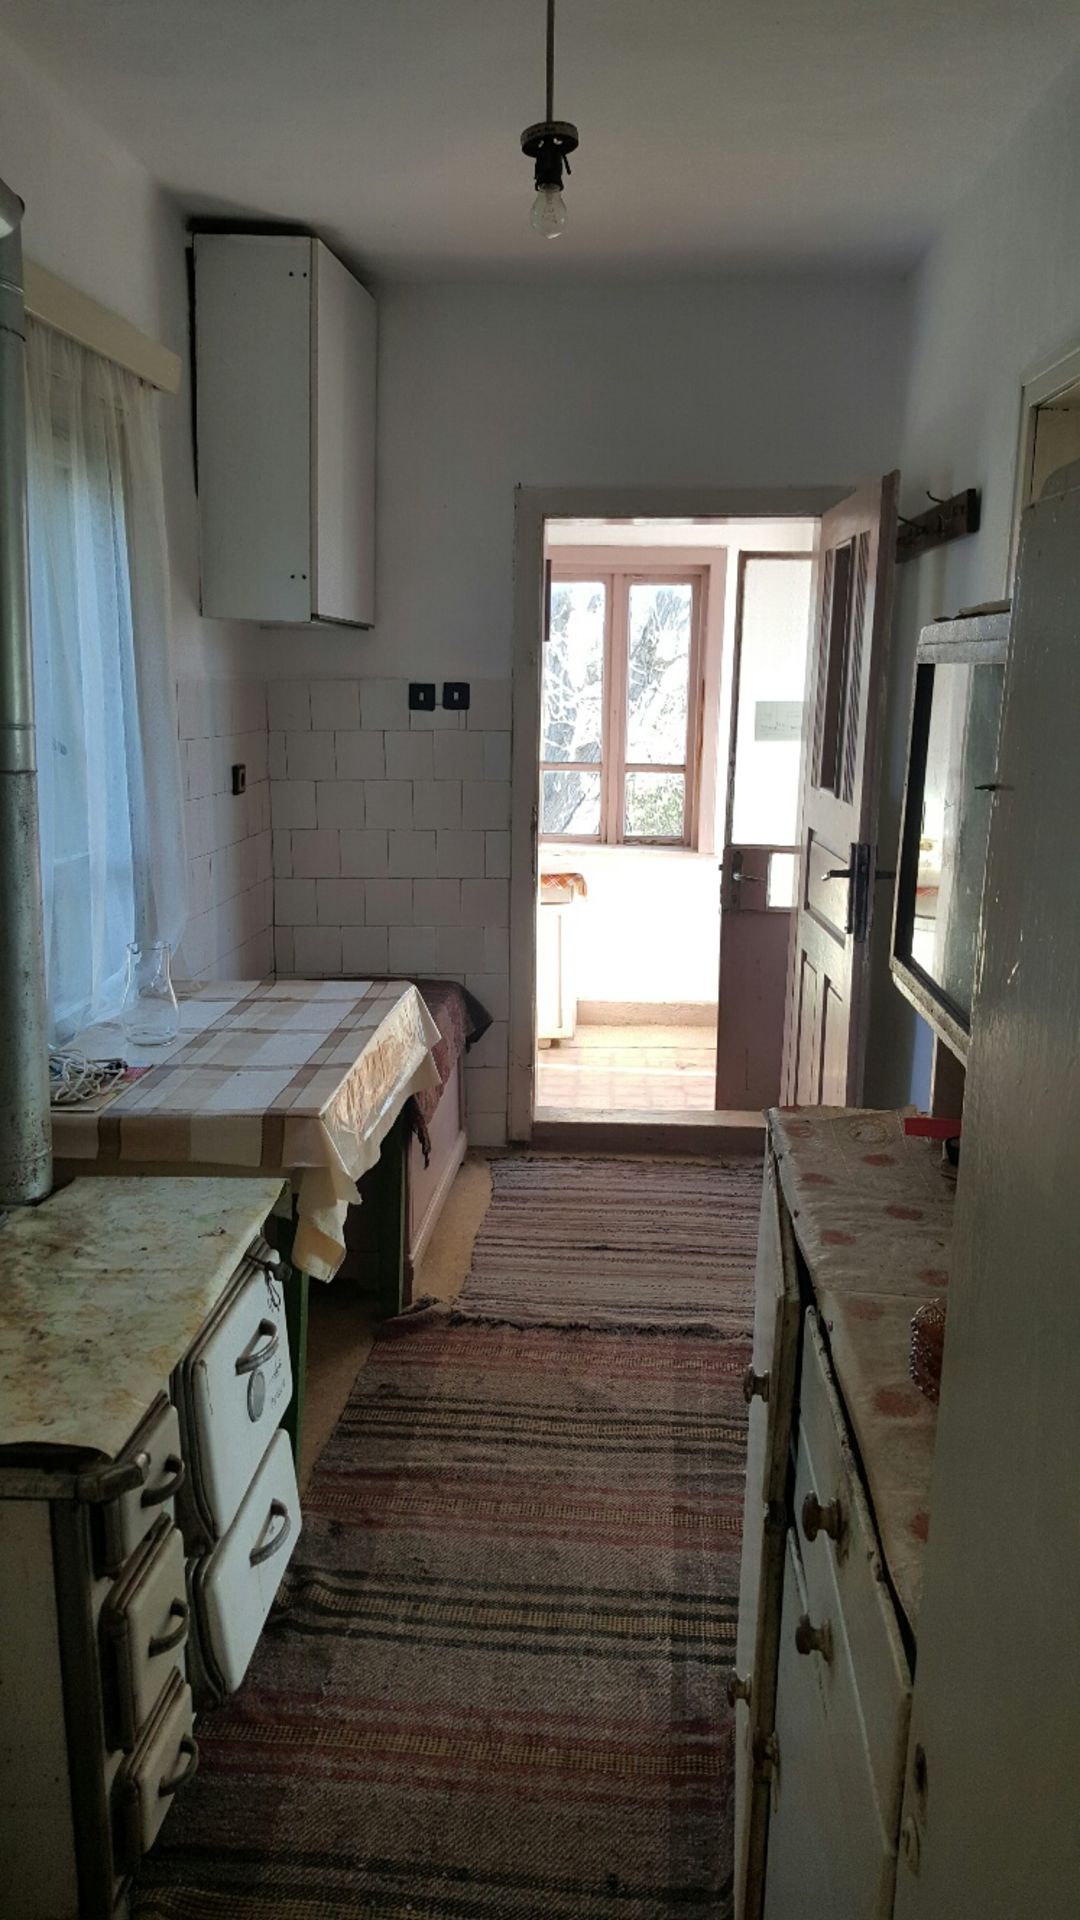 Ready to move into 5 room Bulgarian cottage for sale. With land not far from coast - Image 26 of 42